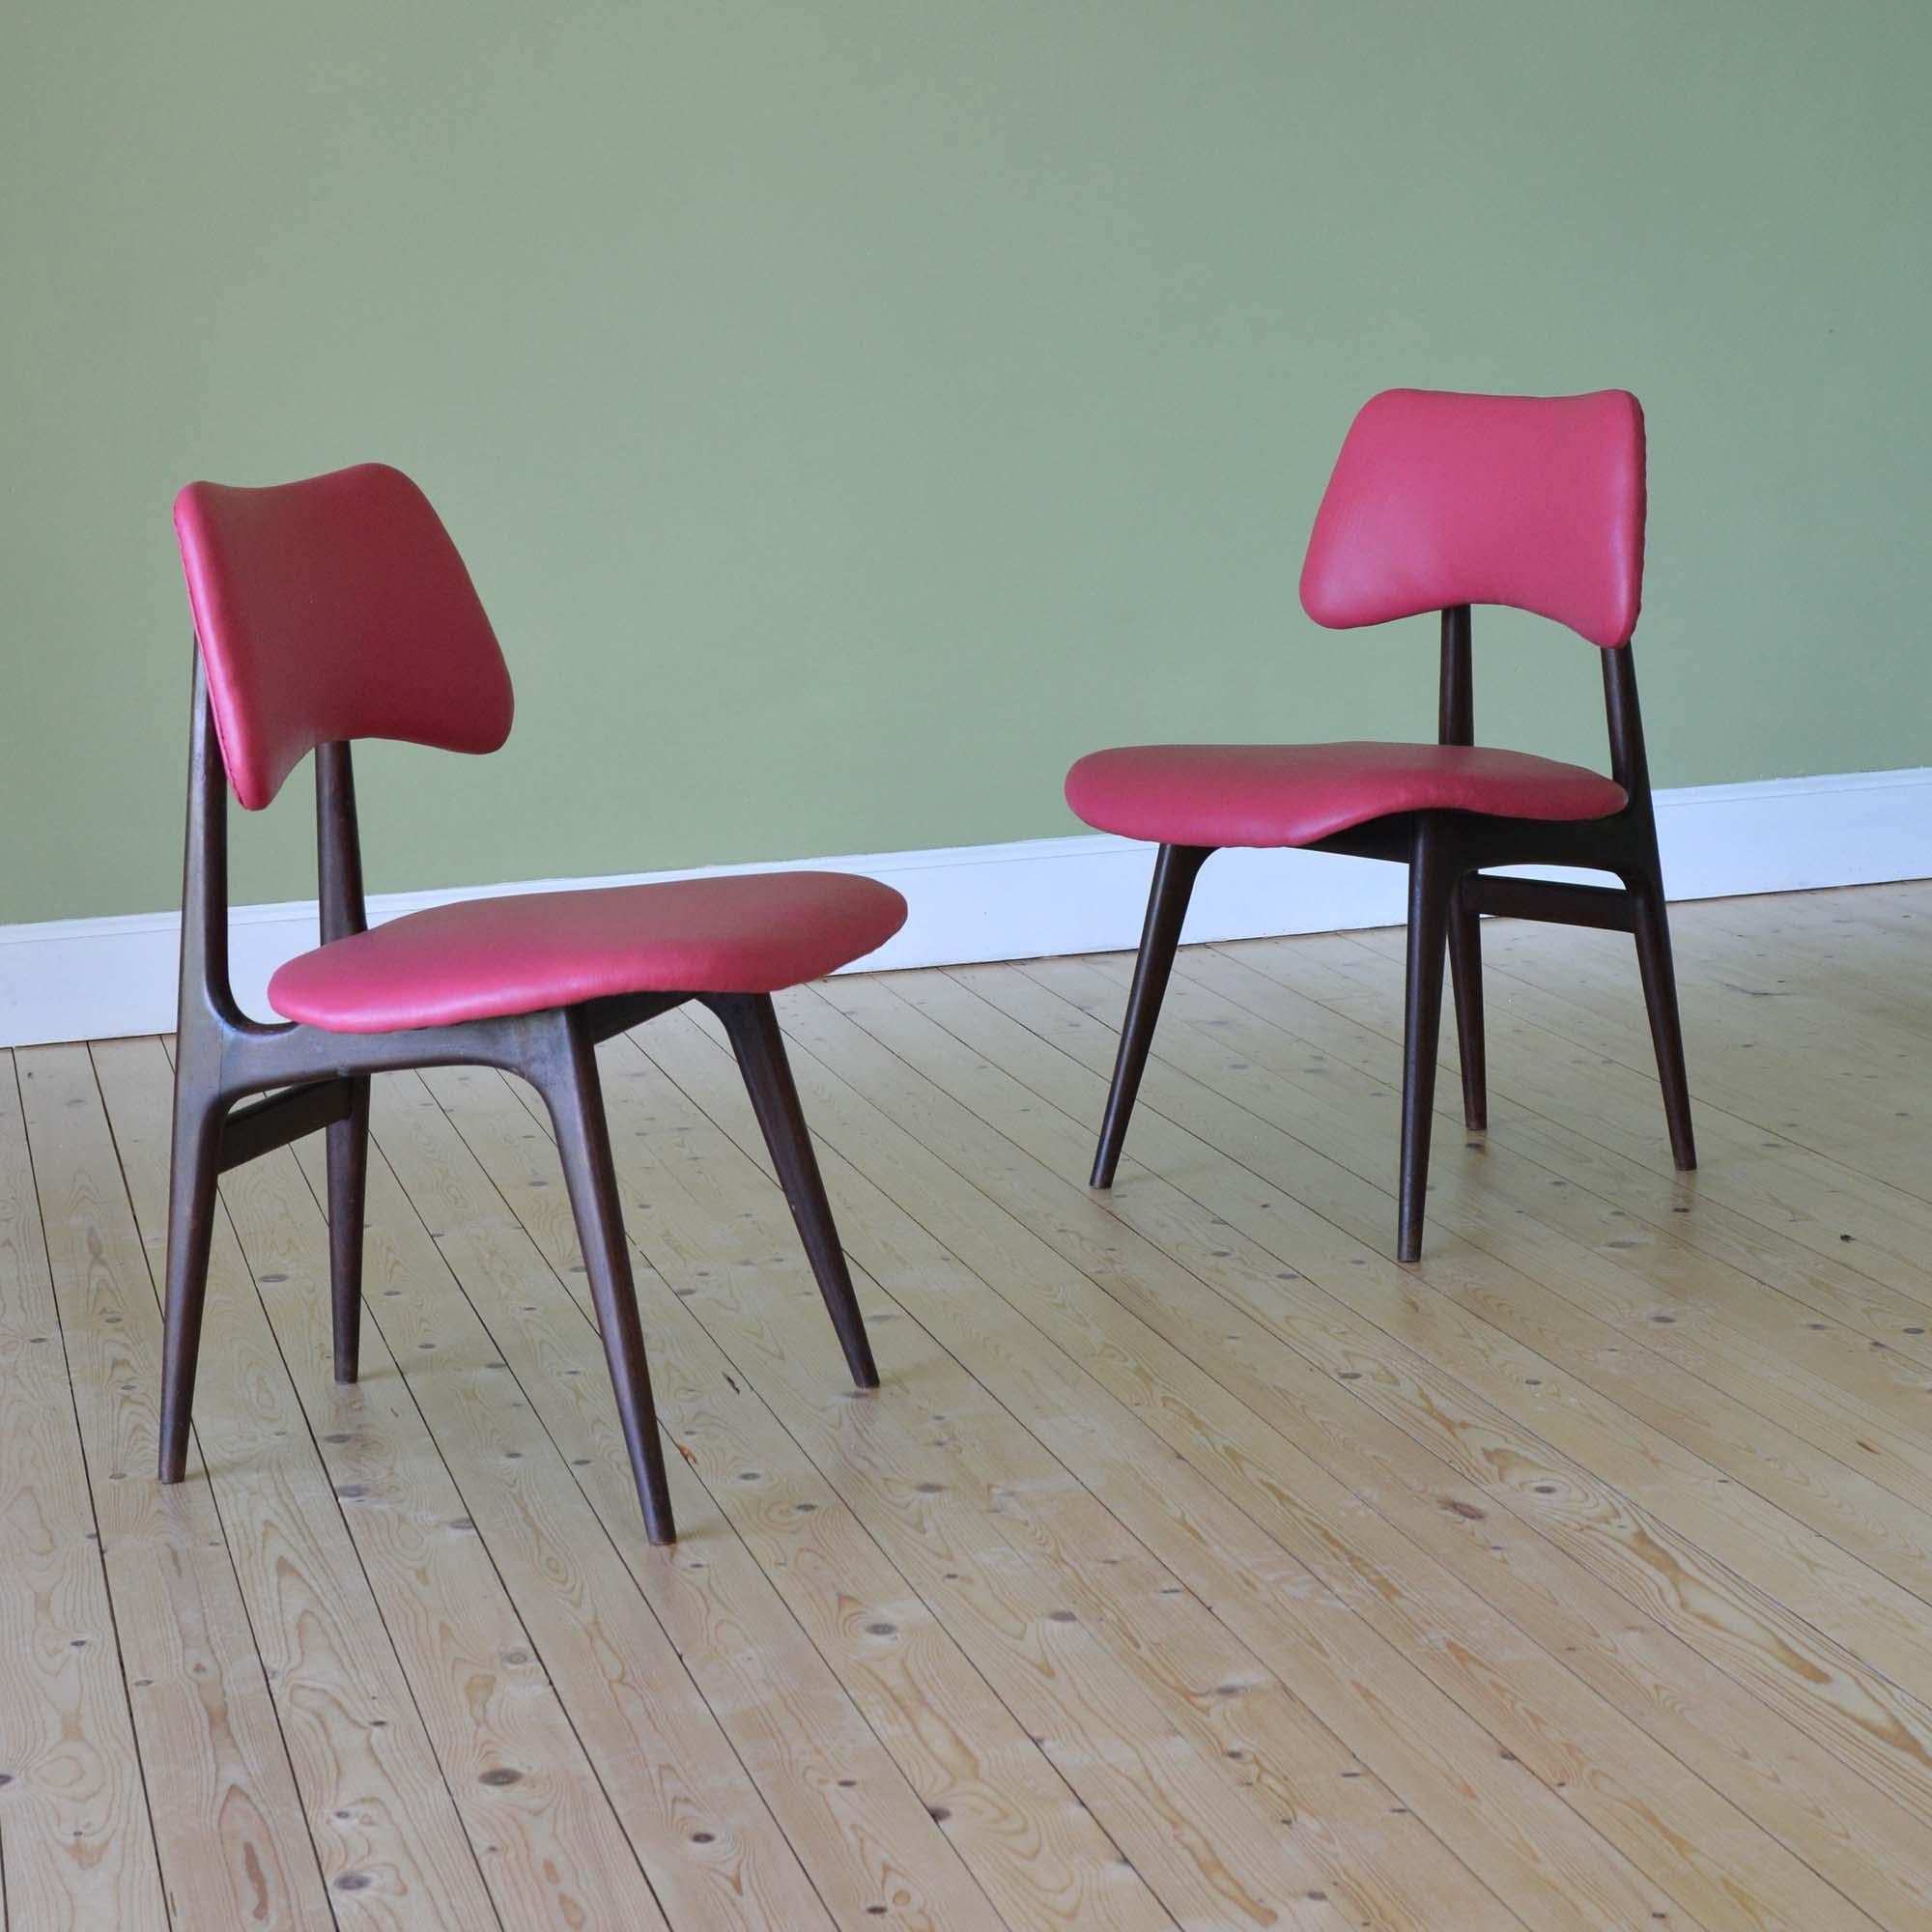 Pair of Danish Mid-Century Walnut Chairs
Likely to by Arne Hovmand-Olsen this pair of chairs were retailed by Heals & Co. and are from the collection of an executive of the company in the 60's.   Shapely walnut frames, newly upholstered in pink